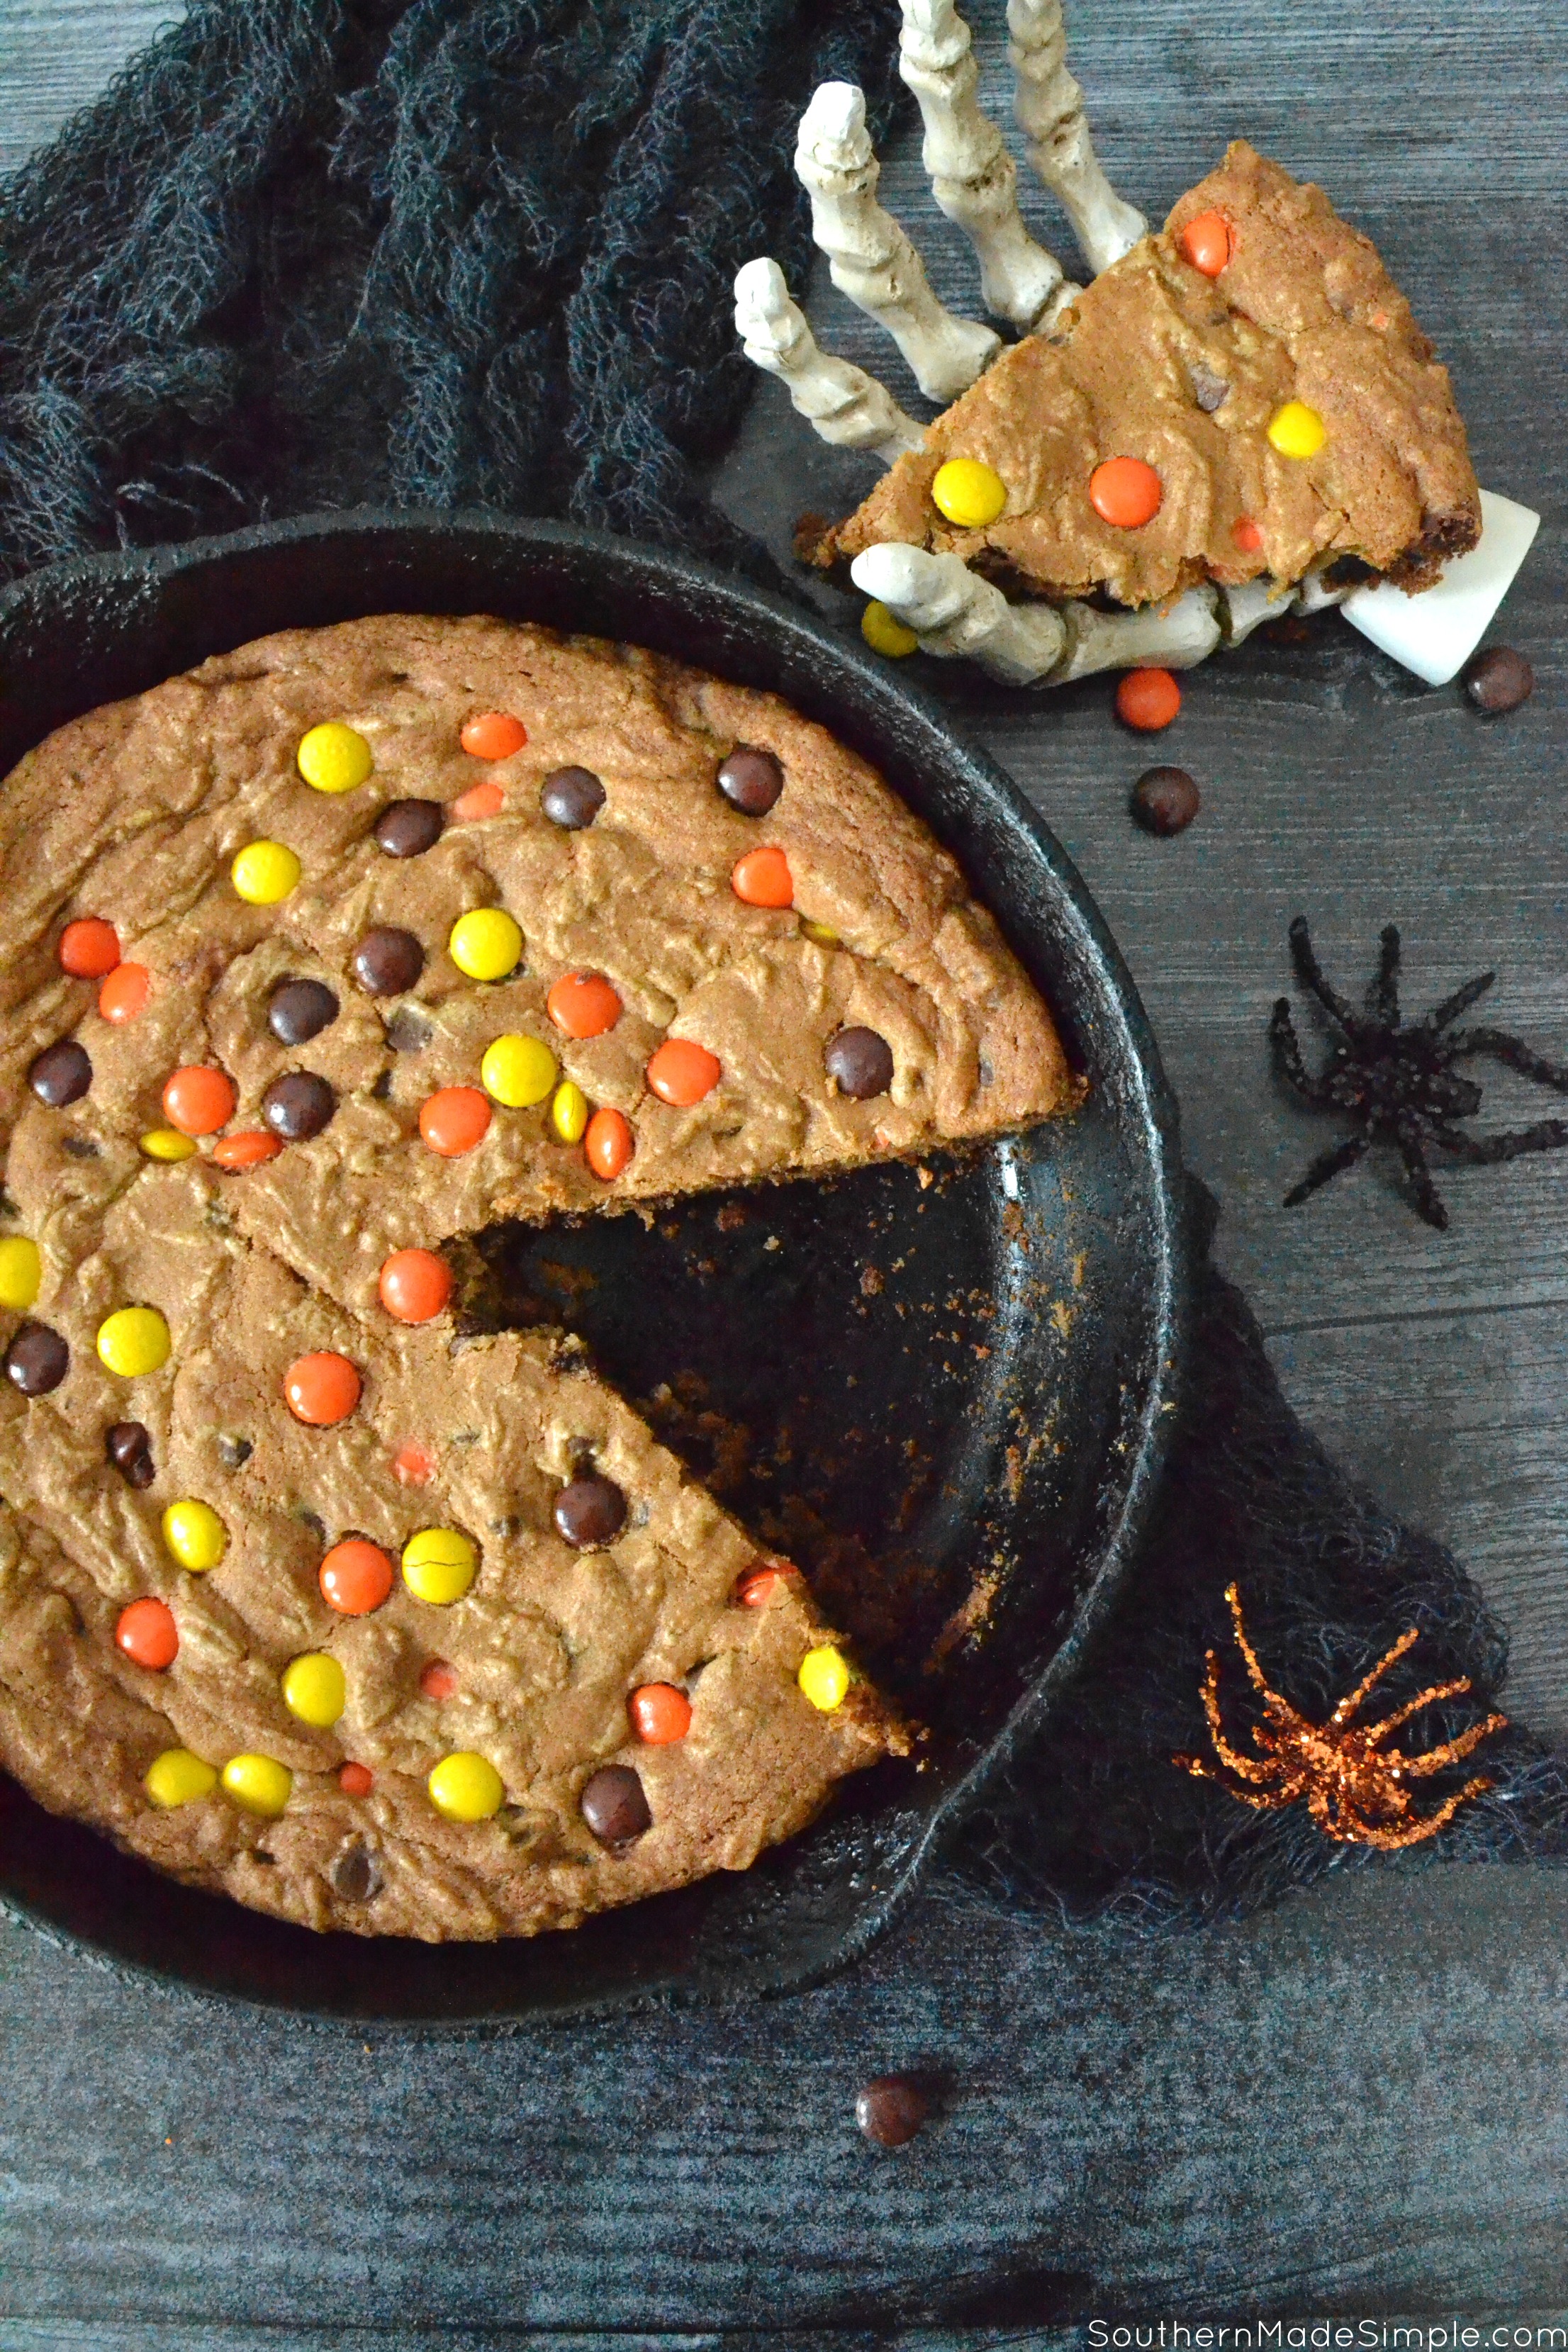 This Halloween Deep Dish Skillet Cookie is filled with chocolate chips, reese's pieces and is baked to perfection in a cast iron skillet! The only thing scary about this cookie is how GOOD it is! #halloweendessert #reesespieces #halloween